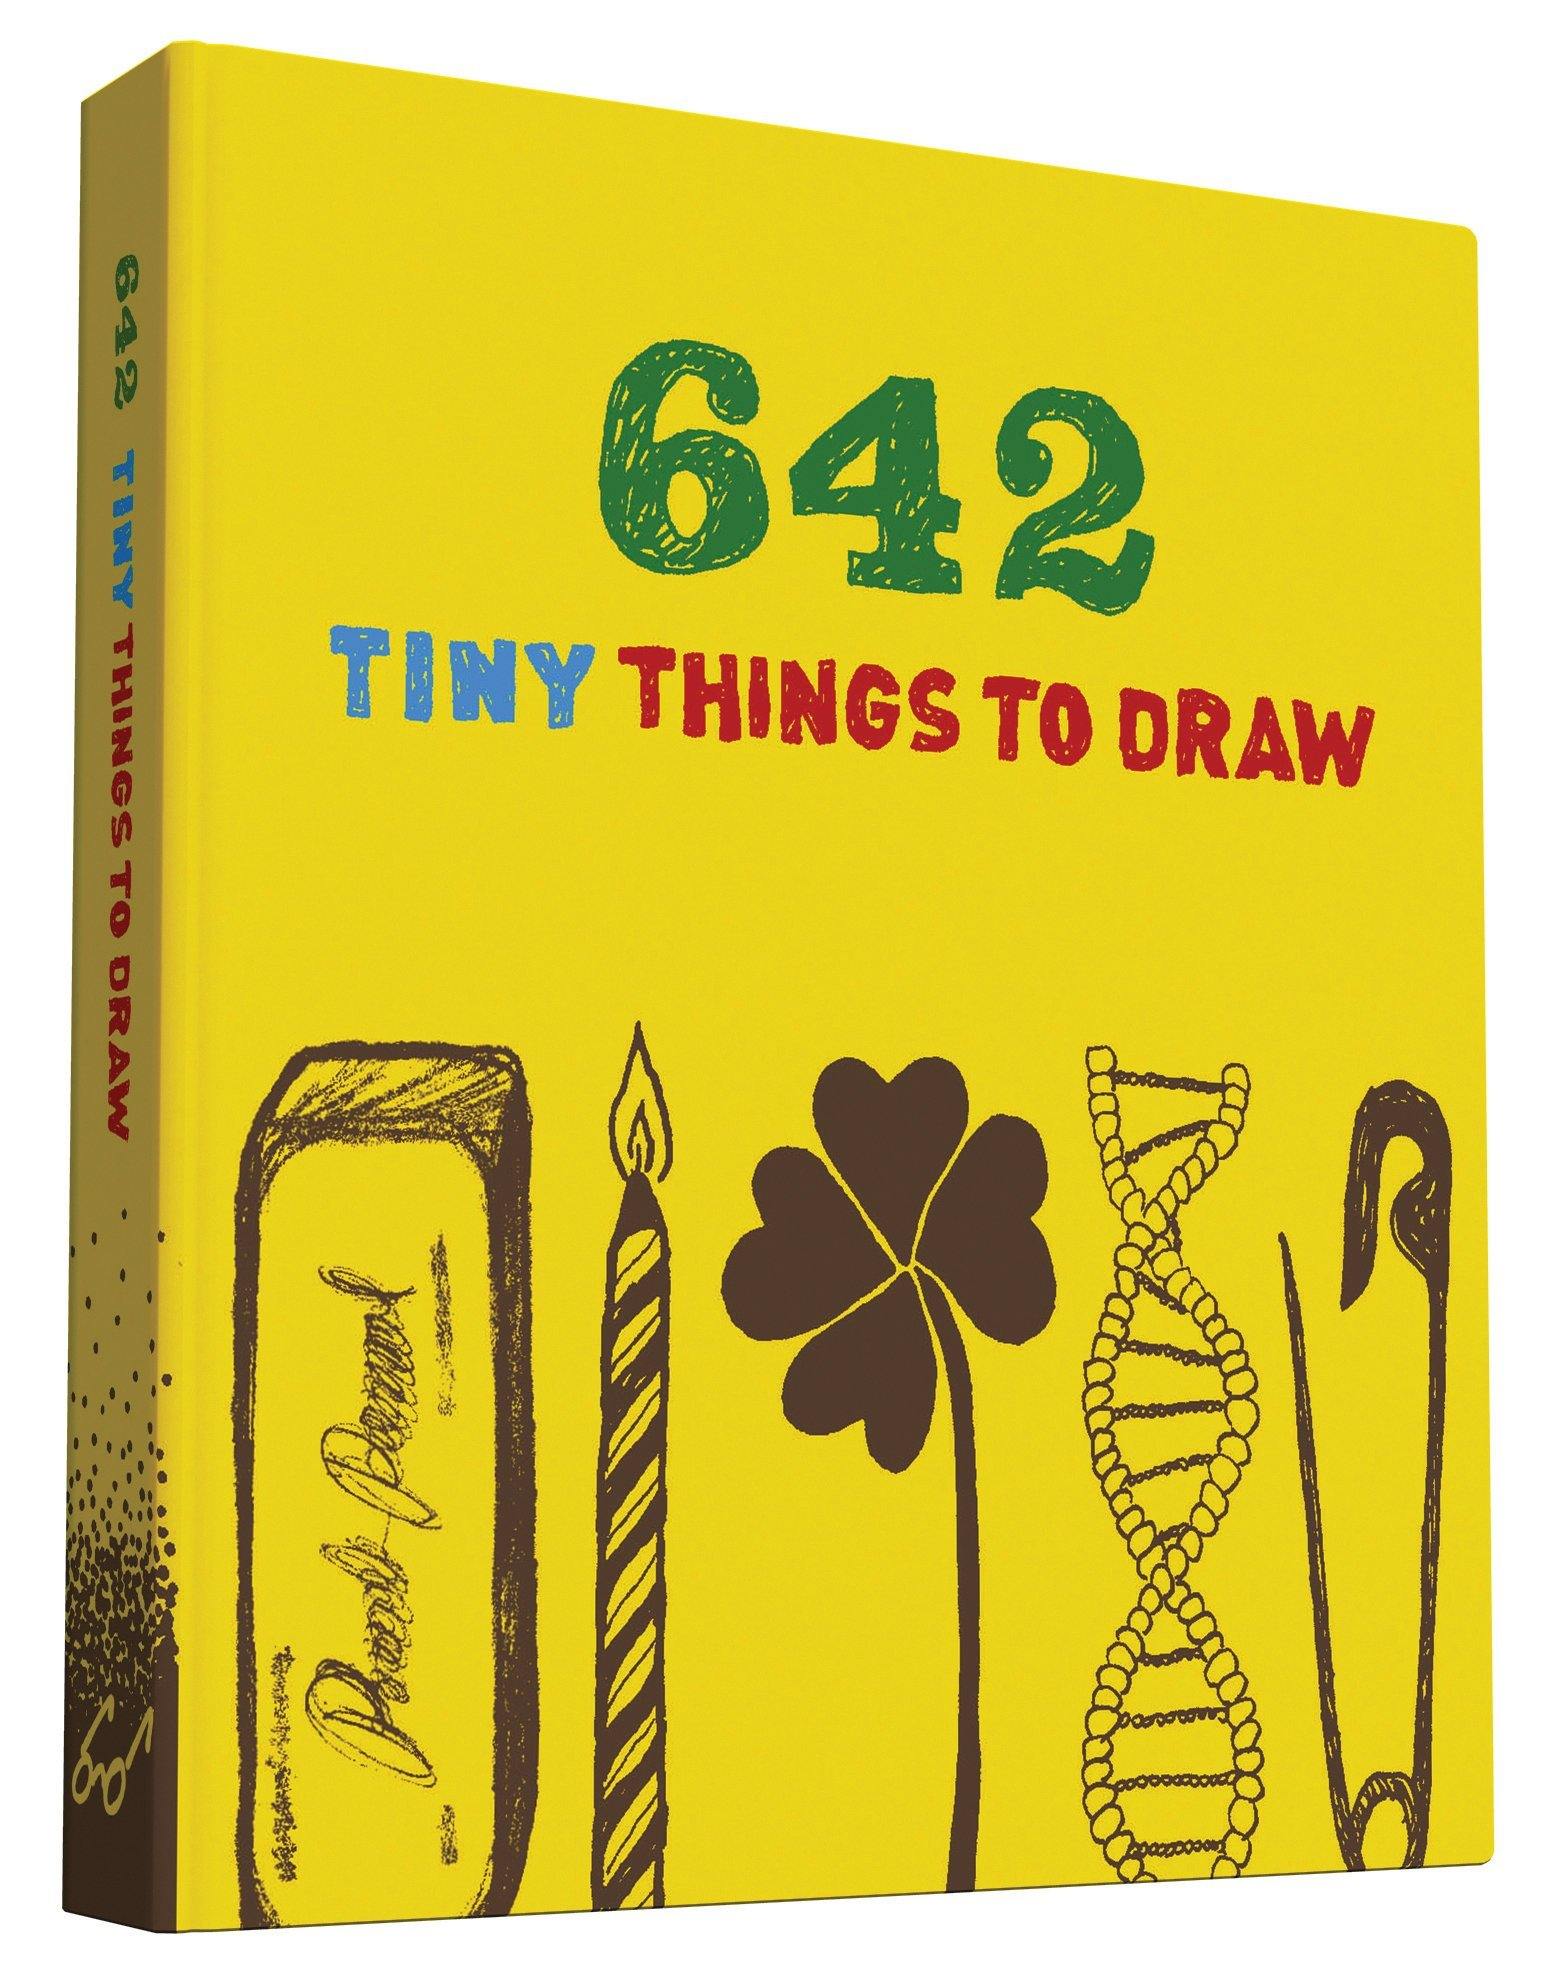 642 Tiny Things To Draw - DIGS